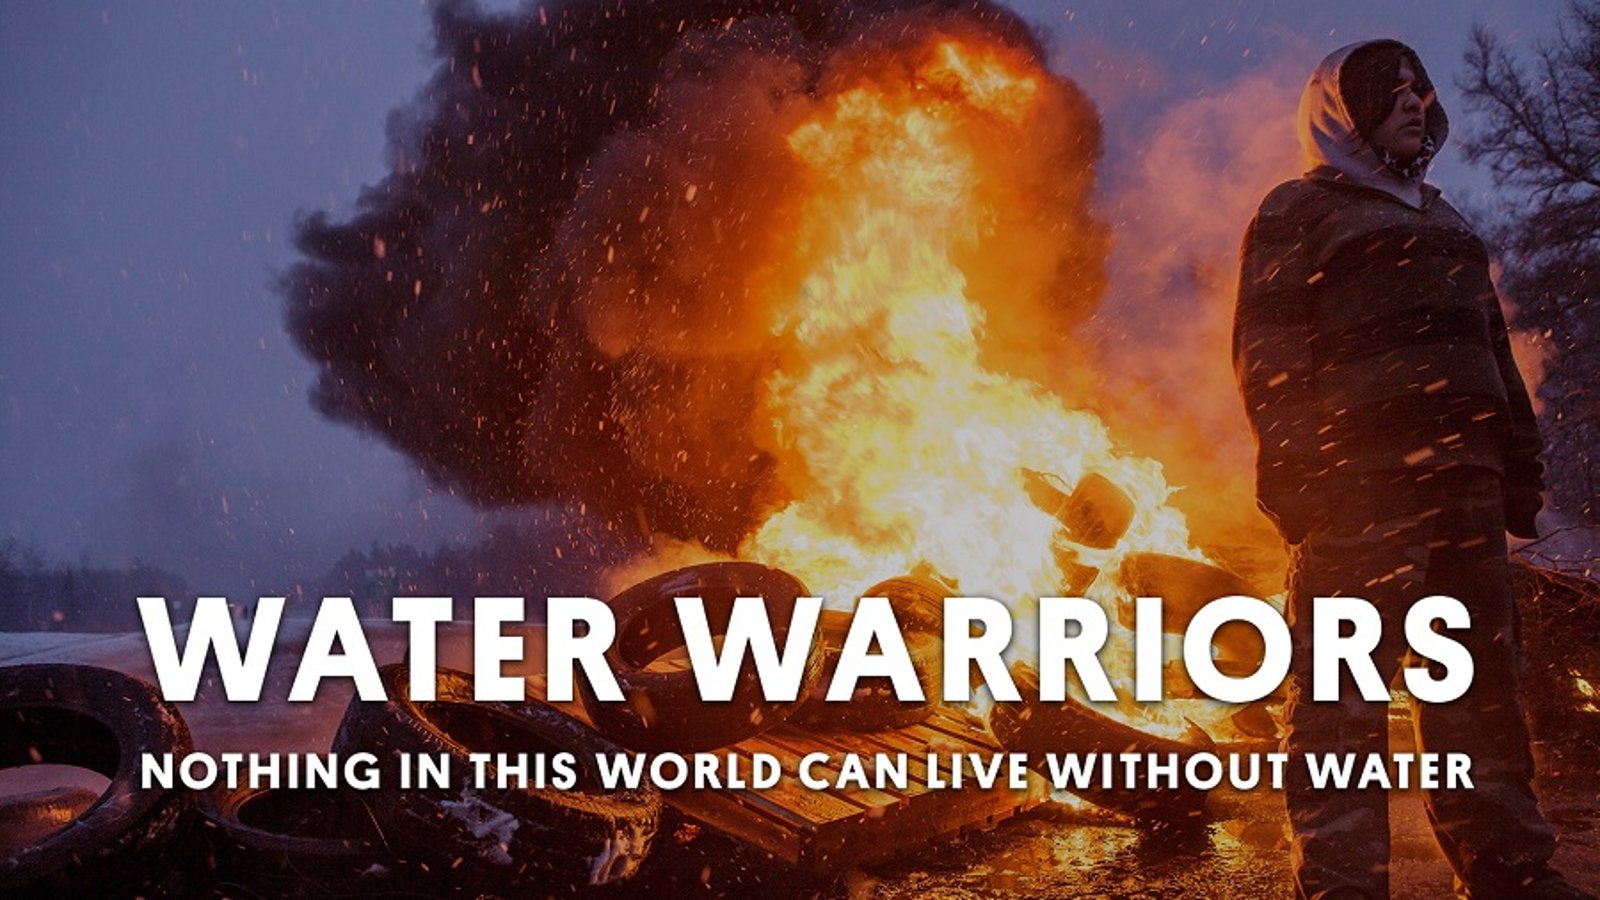 Water Warriors - A Community's Resistance Against the Oil & Gas Industry